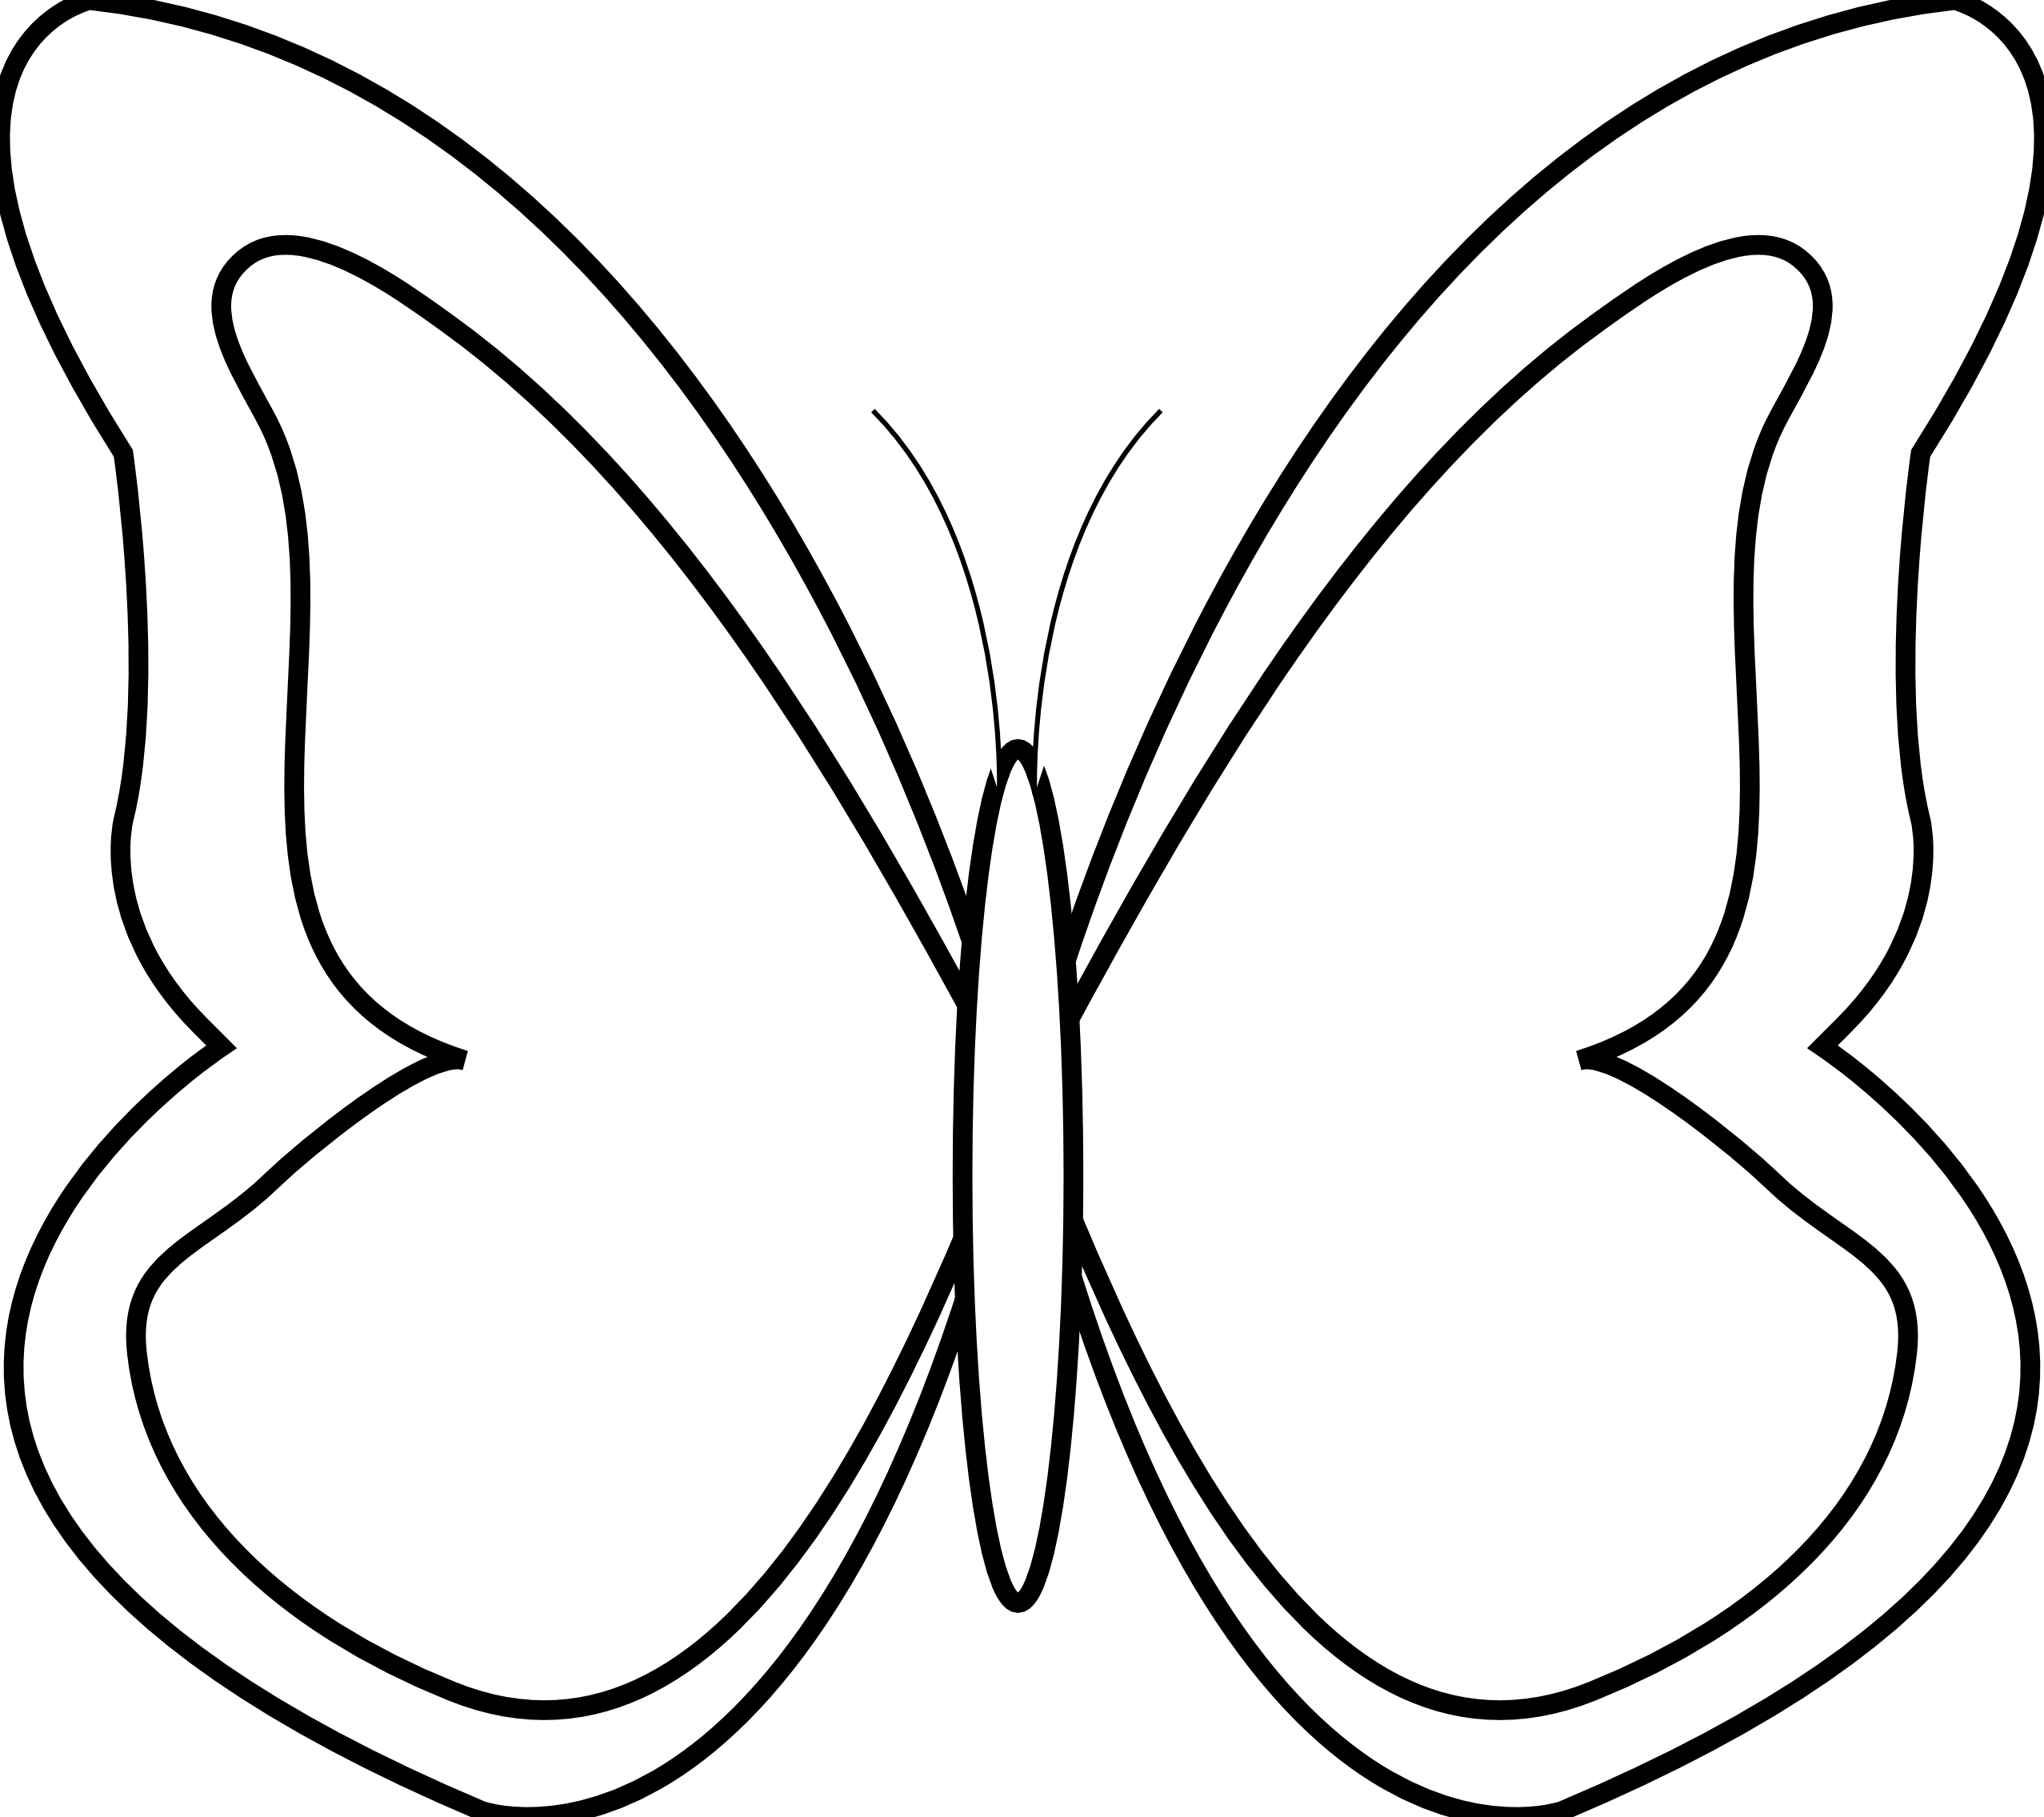 Pix For > Butterfly Image Clipart